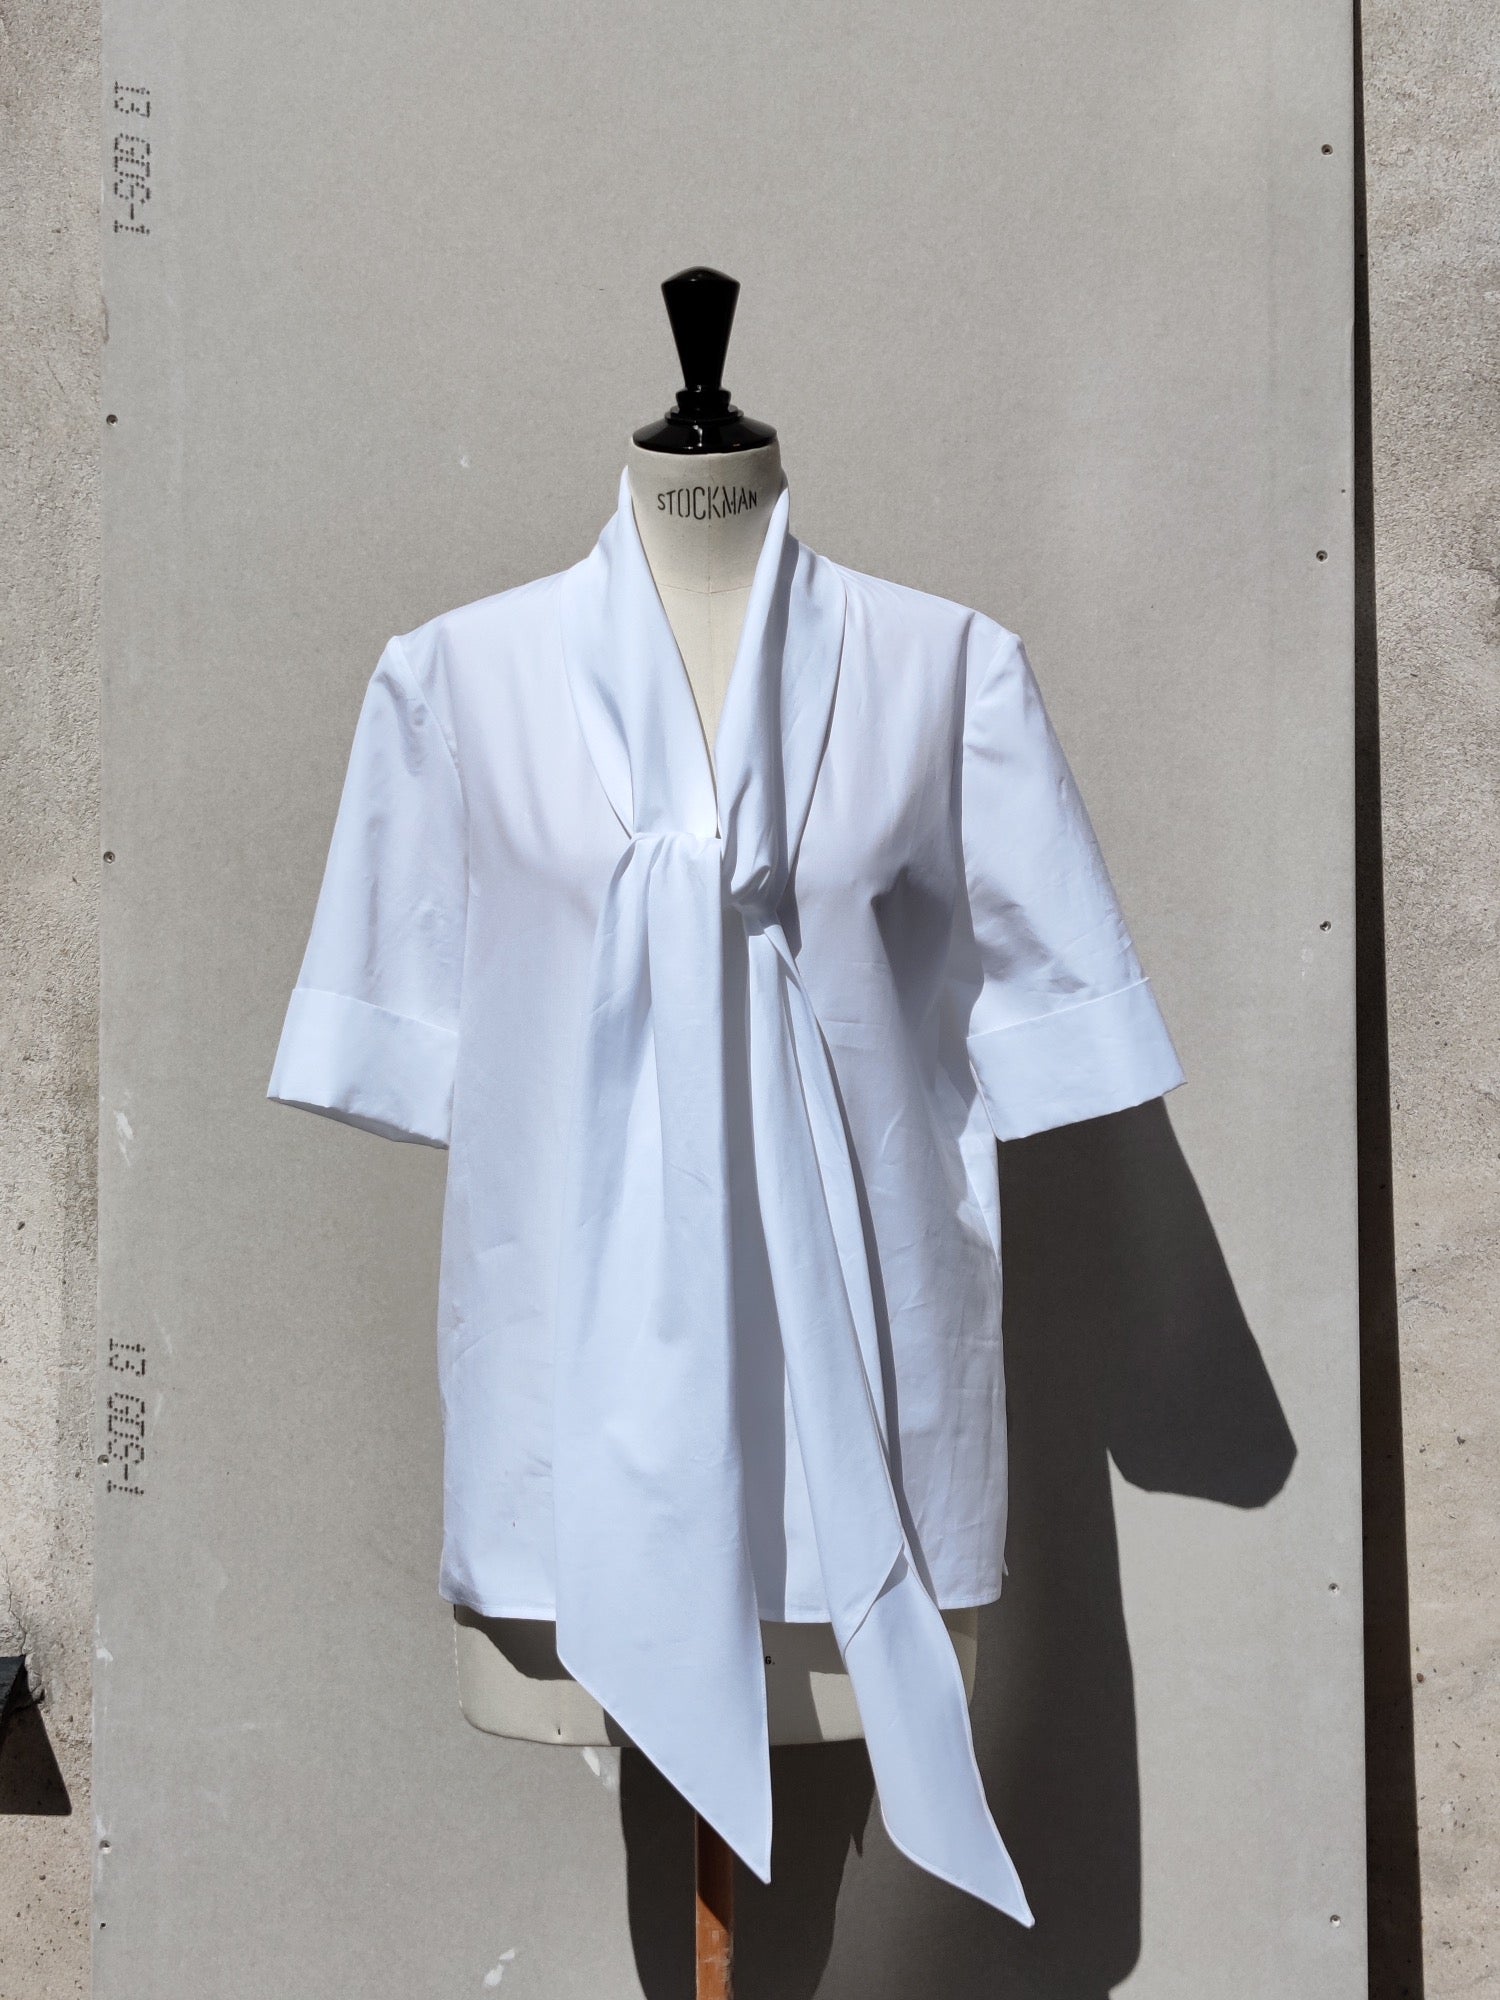 Front view. Alan shirt (white) has a V-shaped neckline incorporating a long ties which can be tied in a knot or a bow or just left.